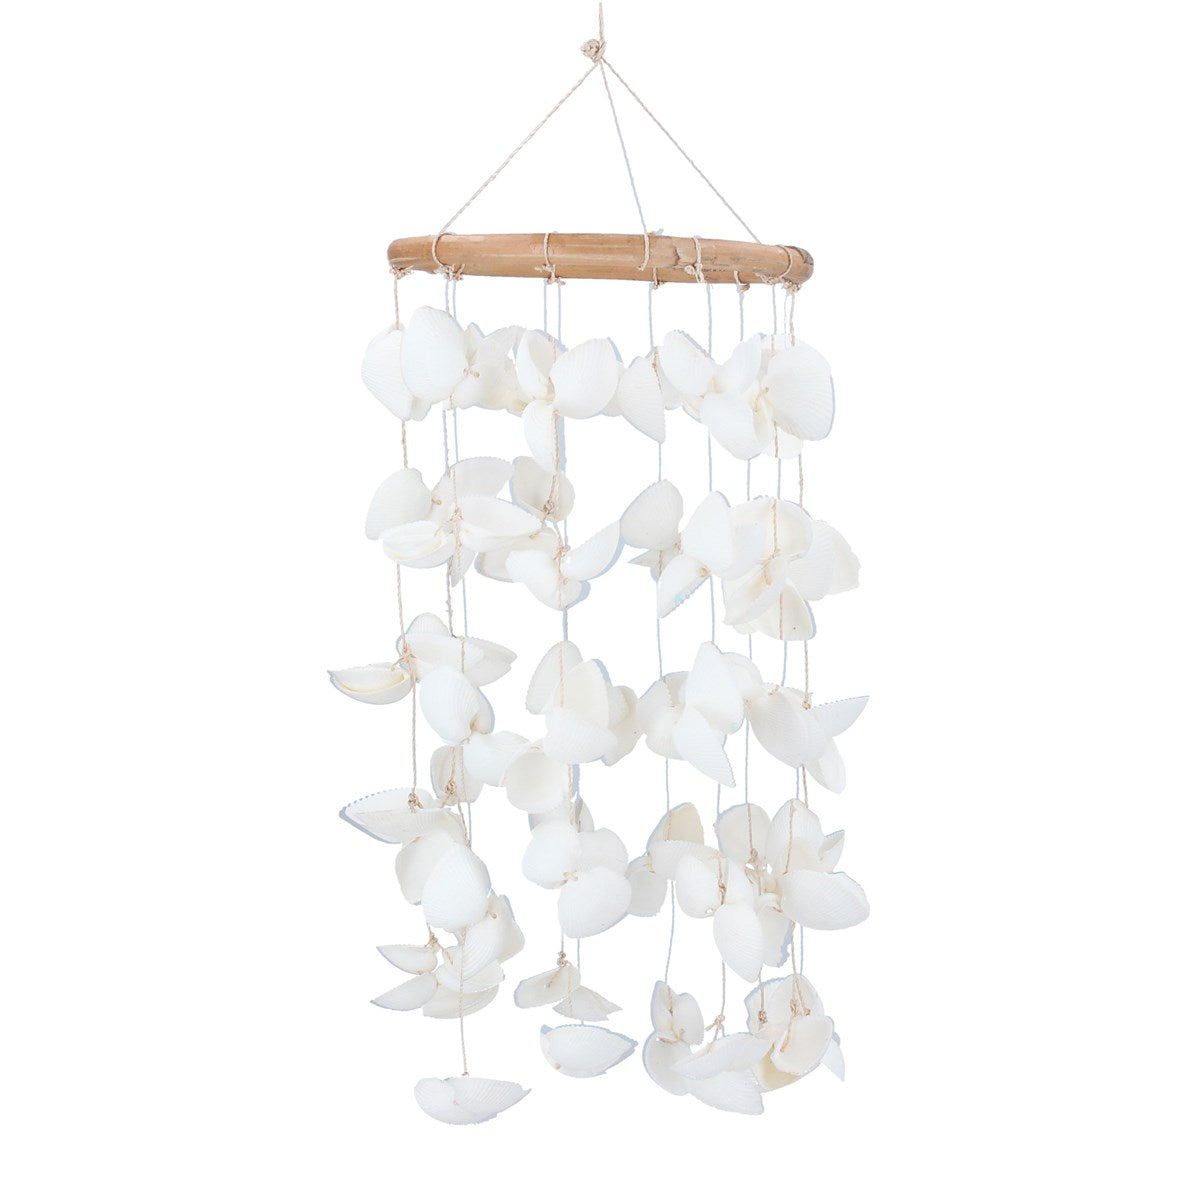 Hanging Mobile Ornament - Clam Shell